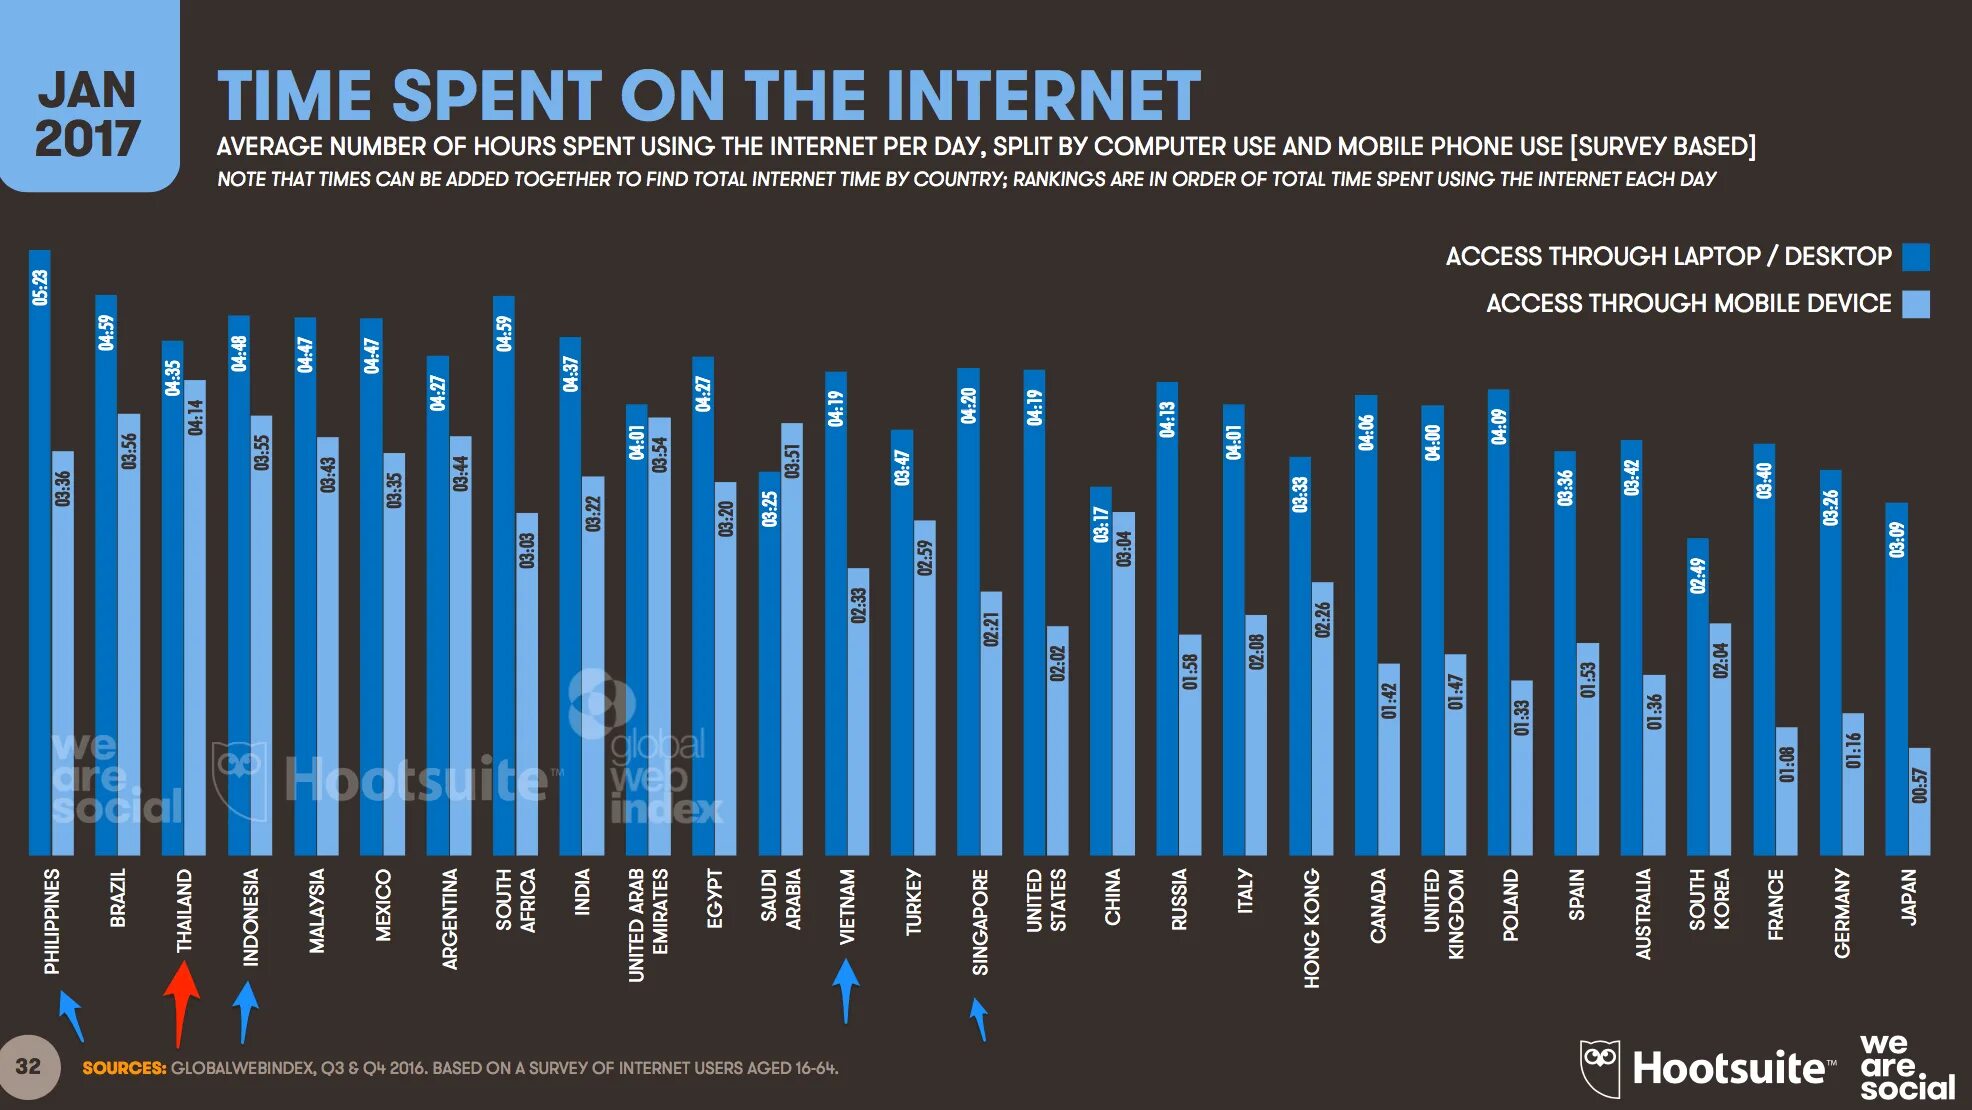 Most web uses. Time spent on social Media. Spending time on the Internet. Age of the Internet топик. We are social.